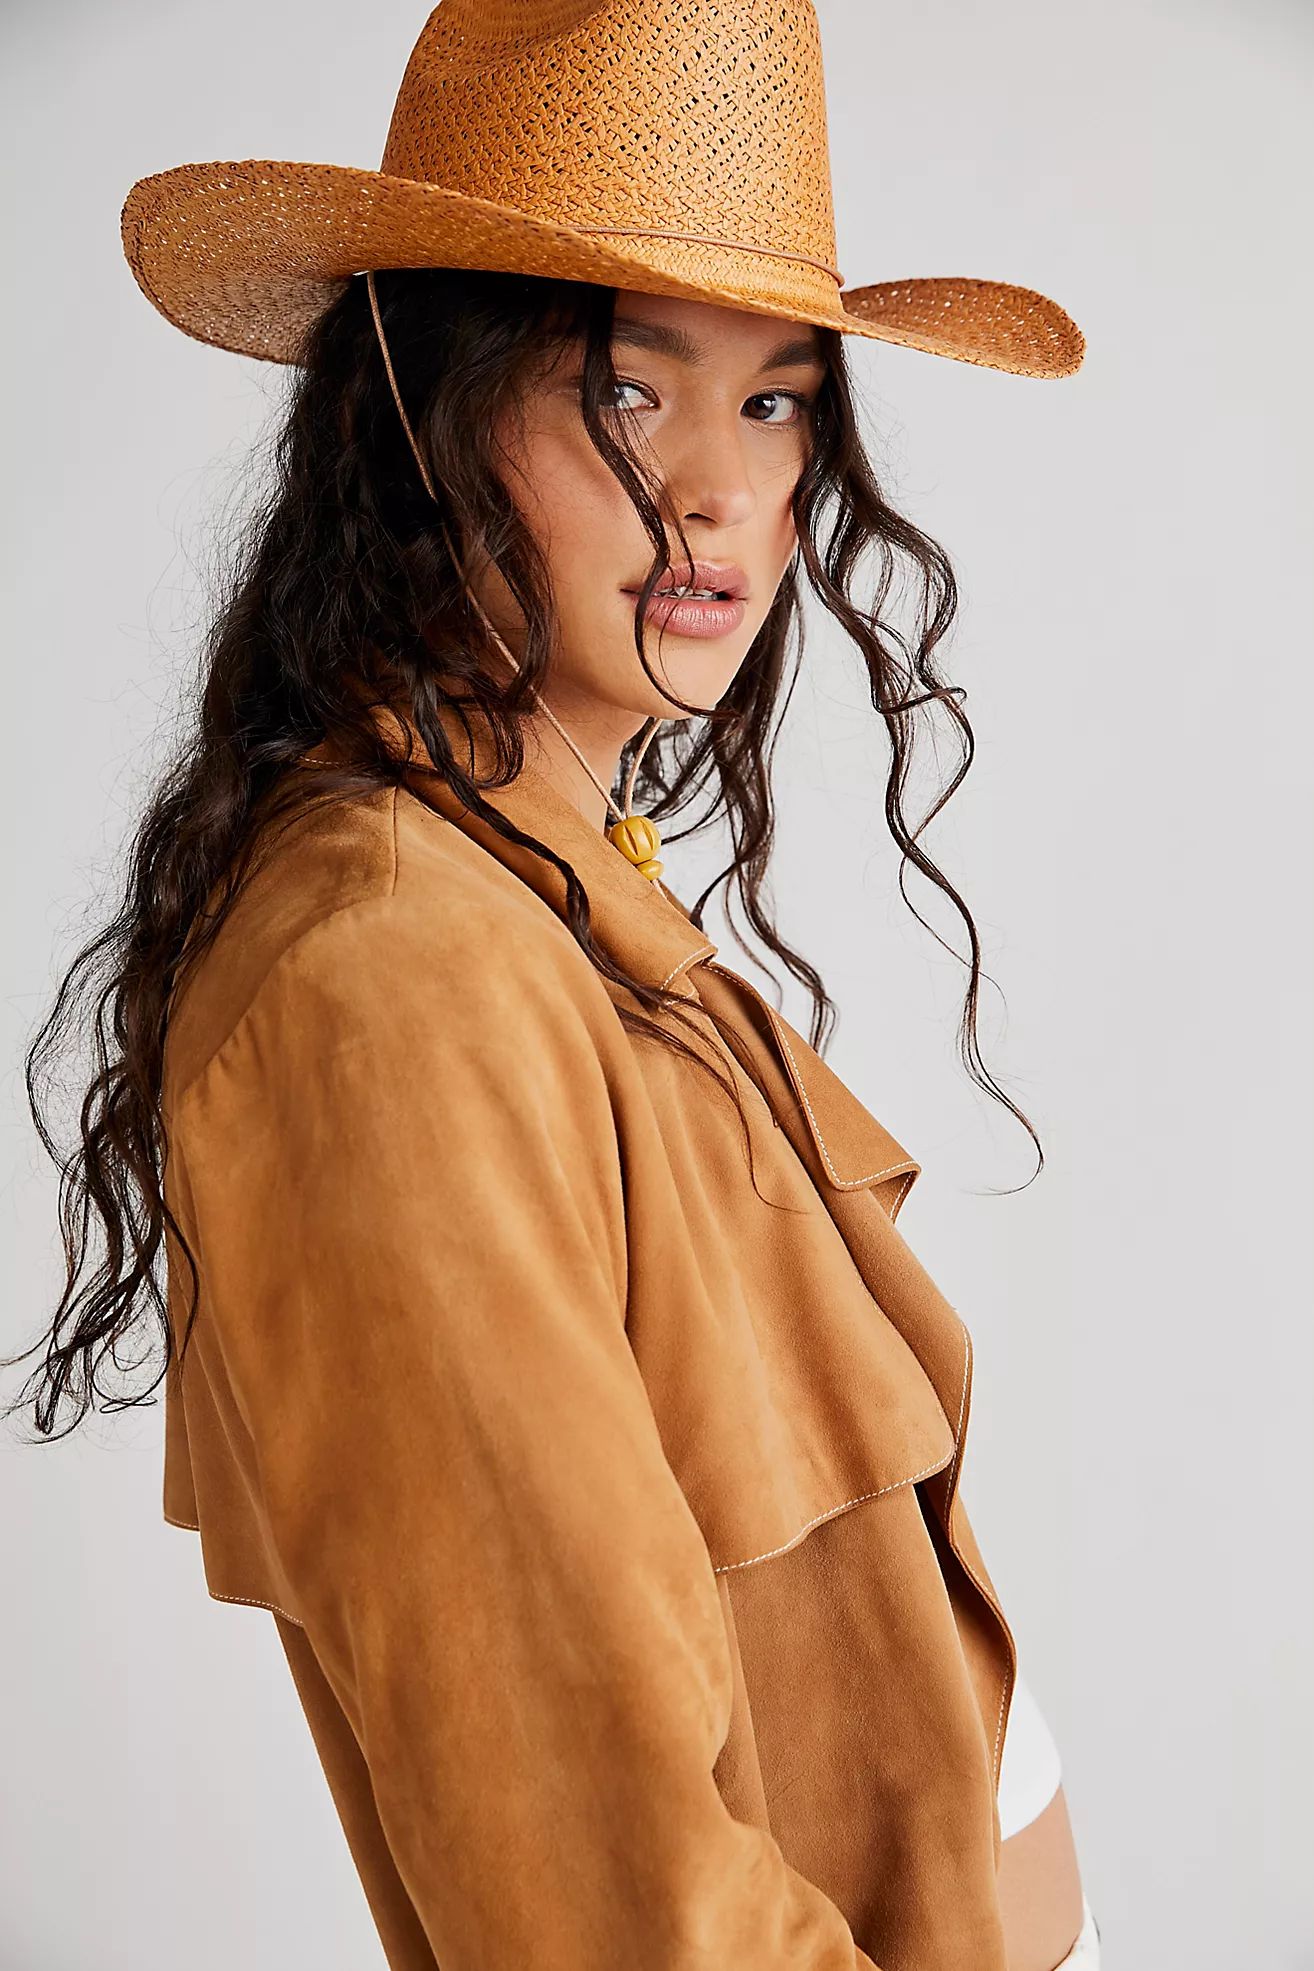 Outlaw Straw Cowboy Hat | Free People (Global - UK&FR Excluded)